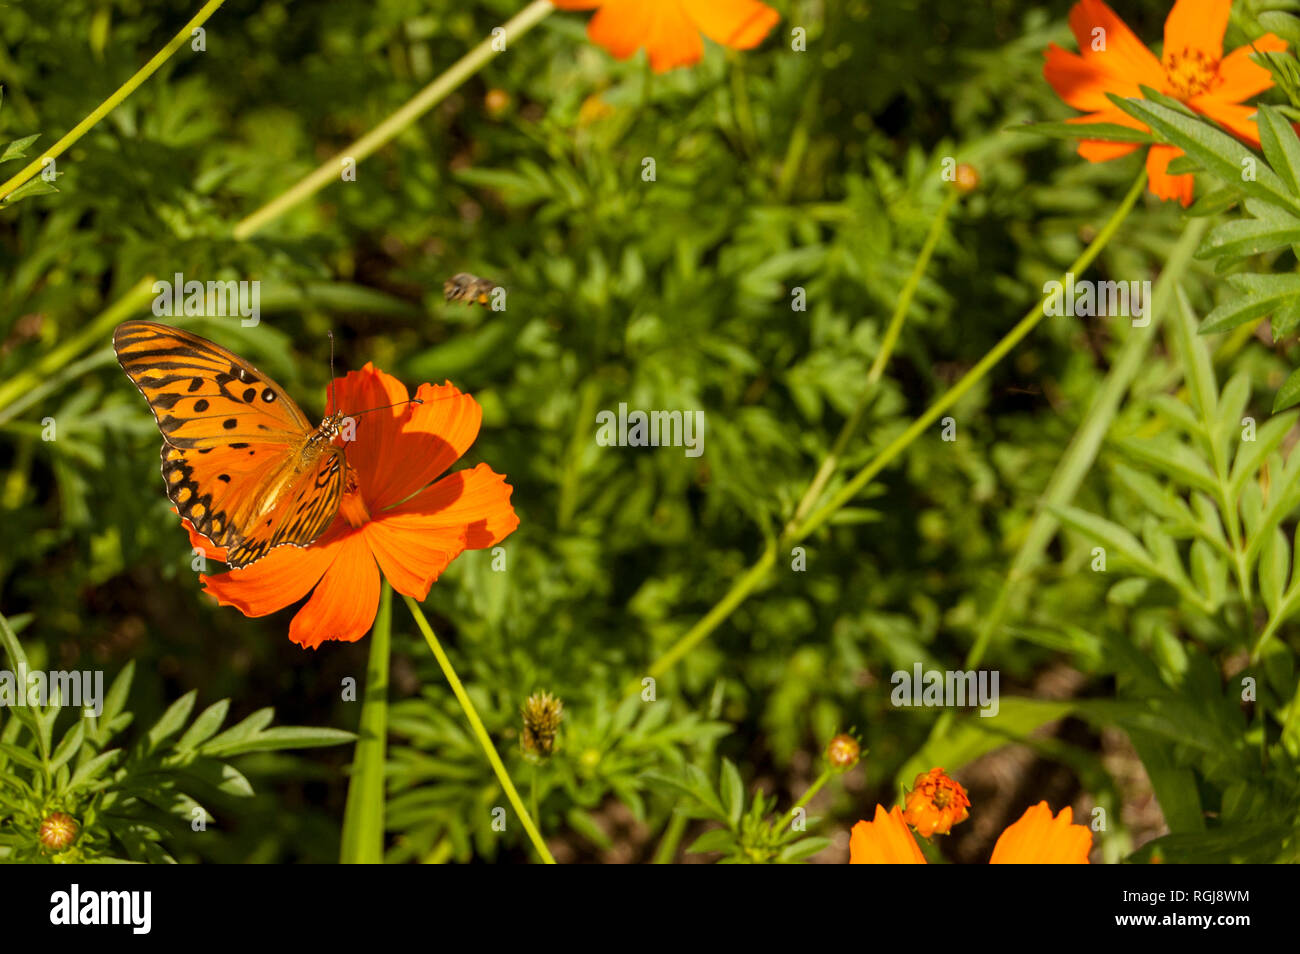 Cosmos sulphureus with butterfly Stock Photo